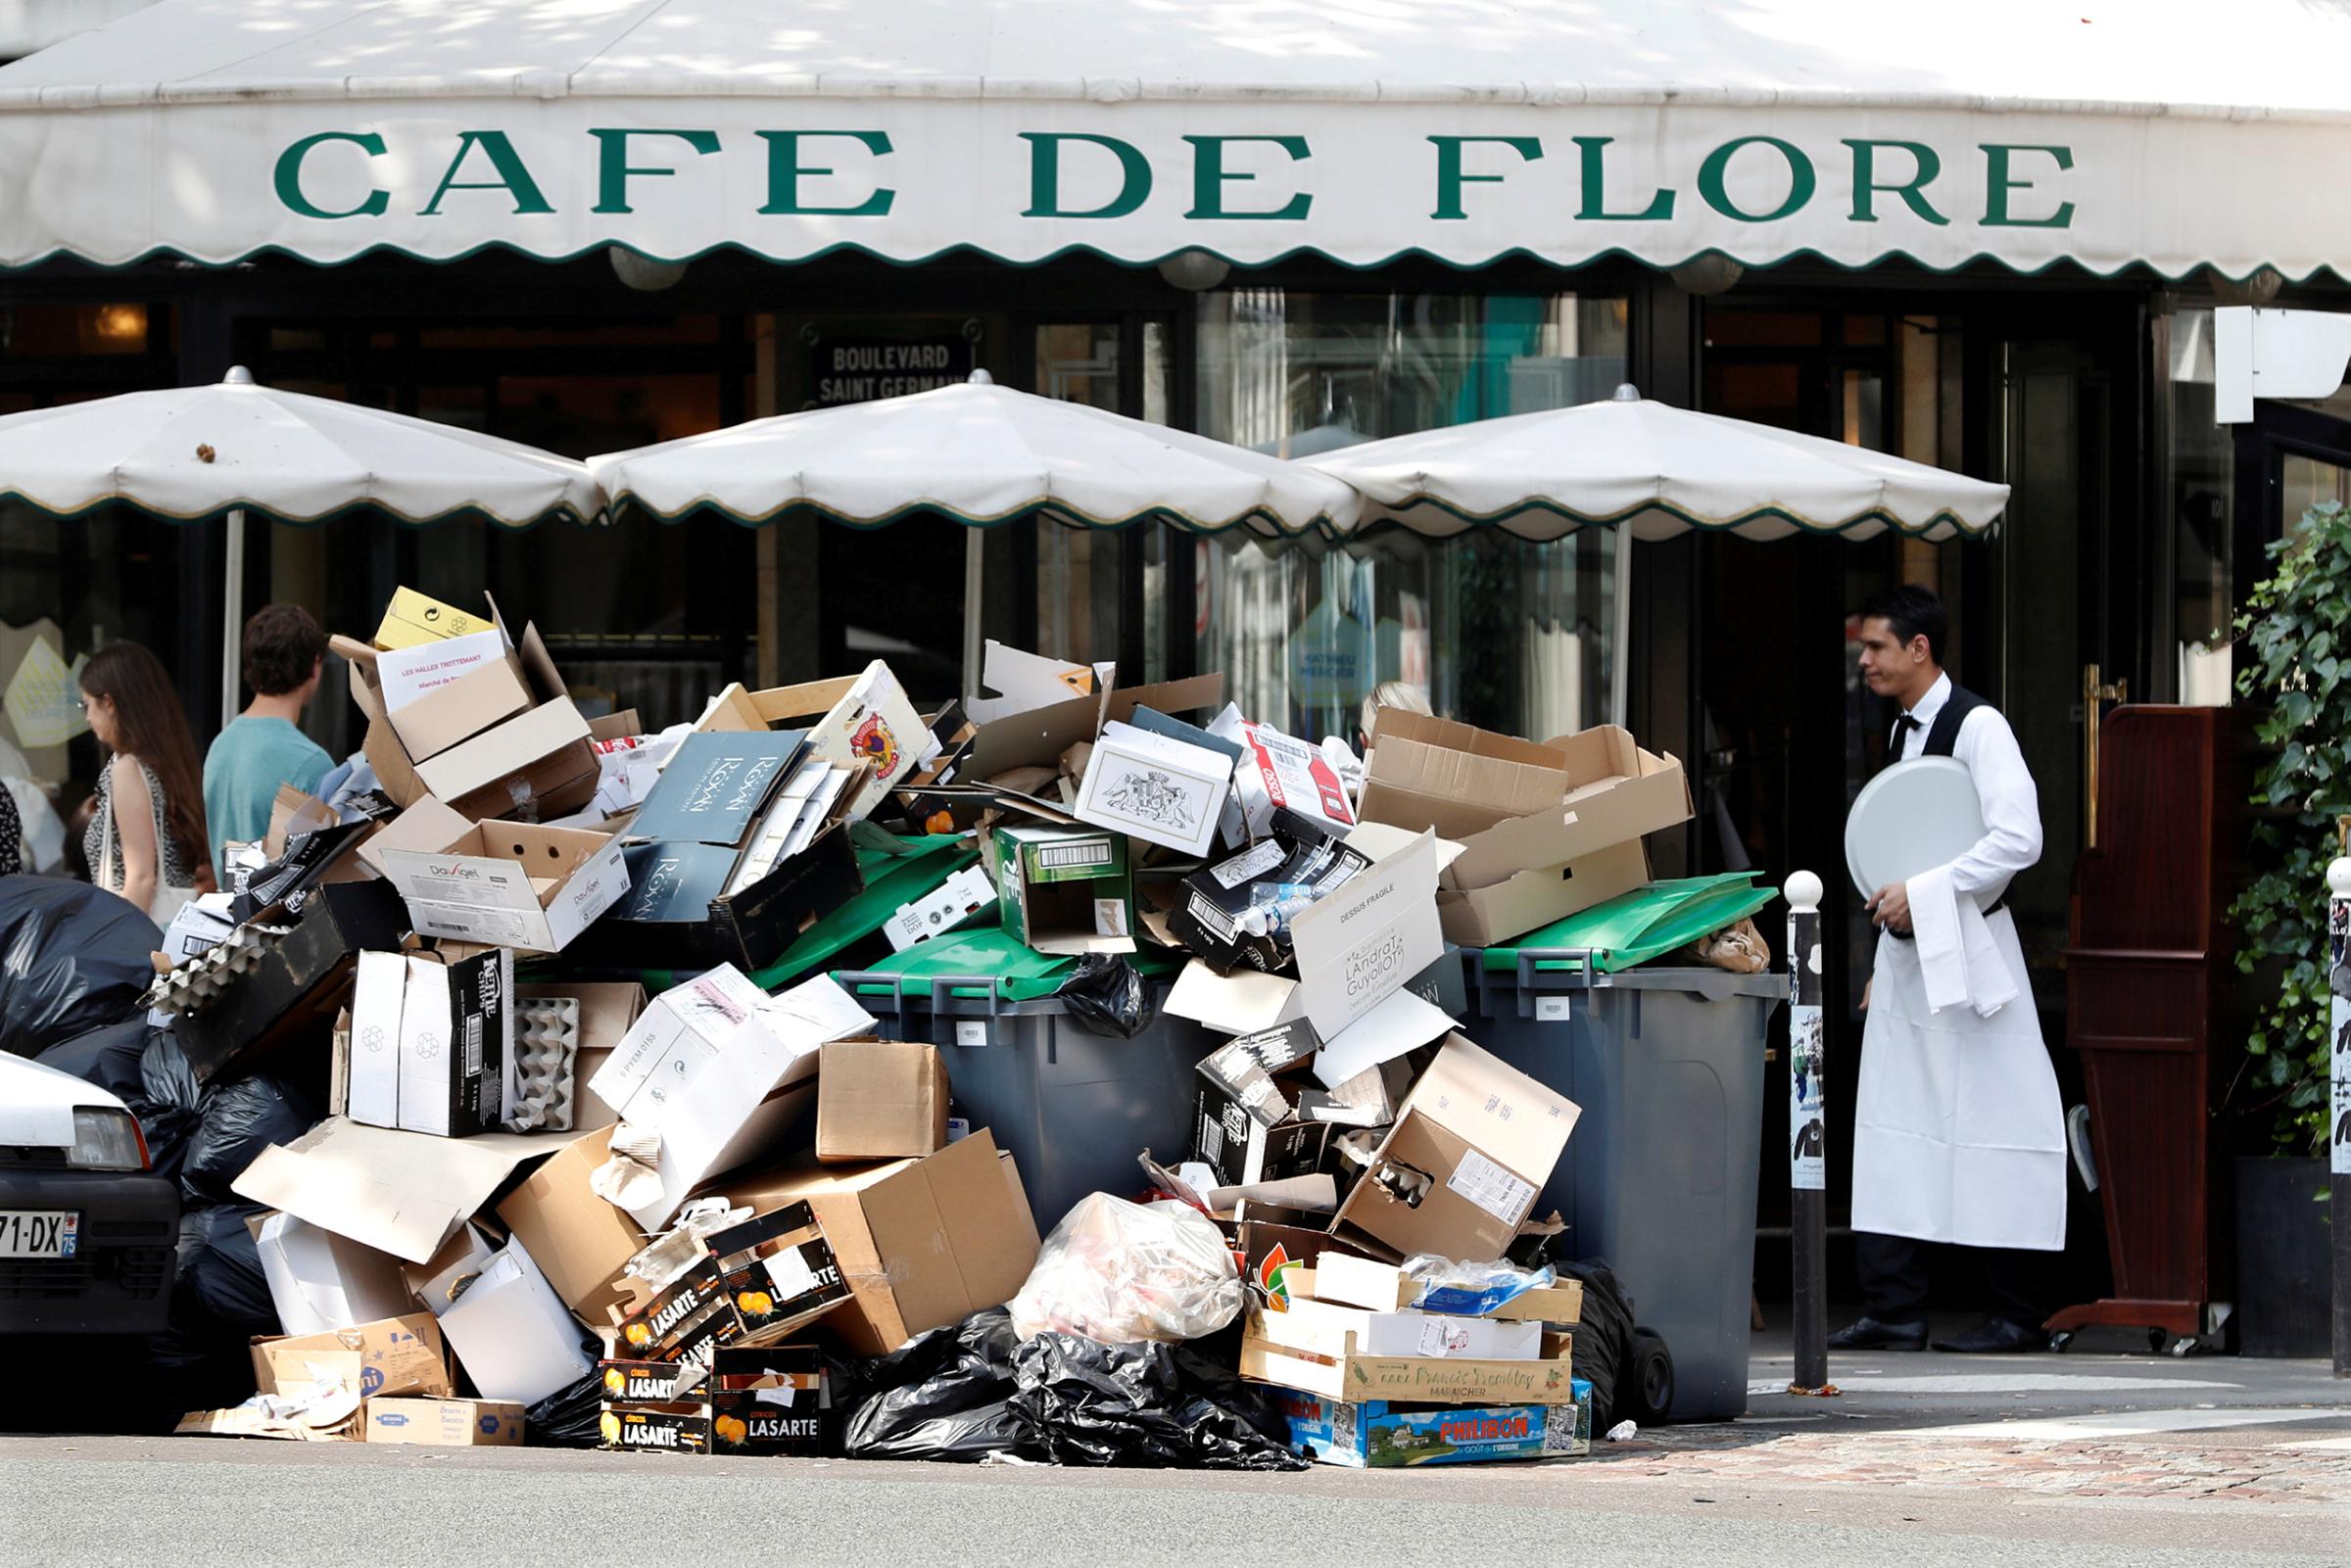 A waiter stands near a pile of rubbish bags in front of the Cafe de Flore in Paris during a strike of garbage collectors and sewer workers of the city of Paris to protest the labour reforms law proposal